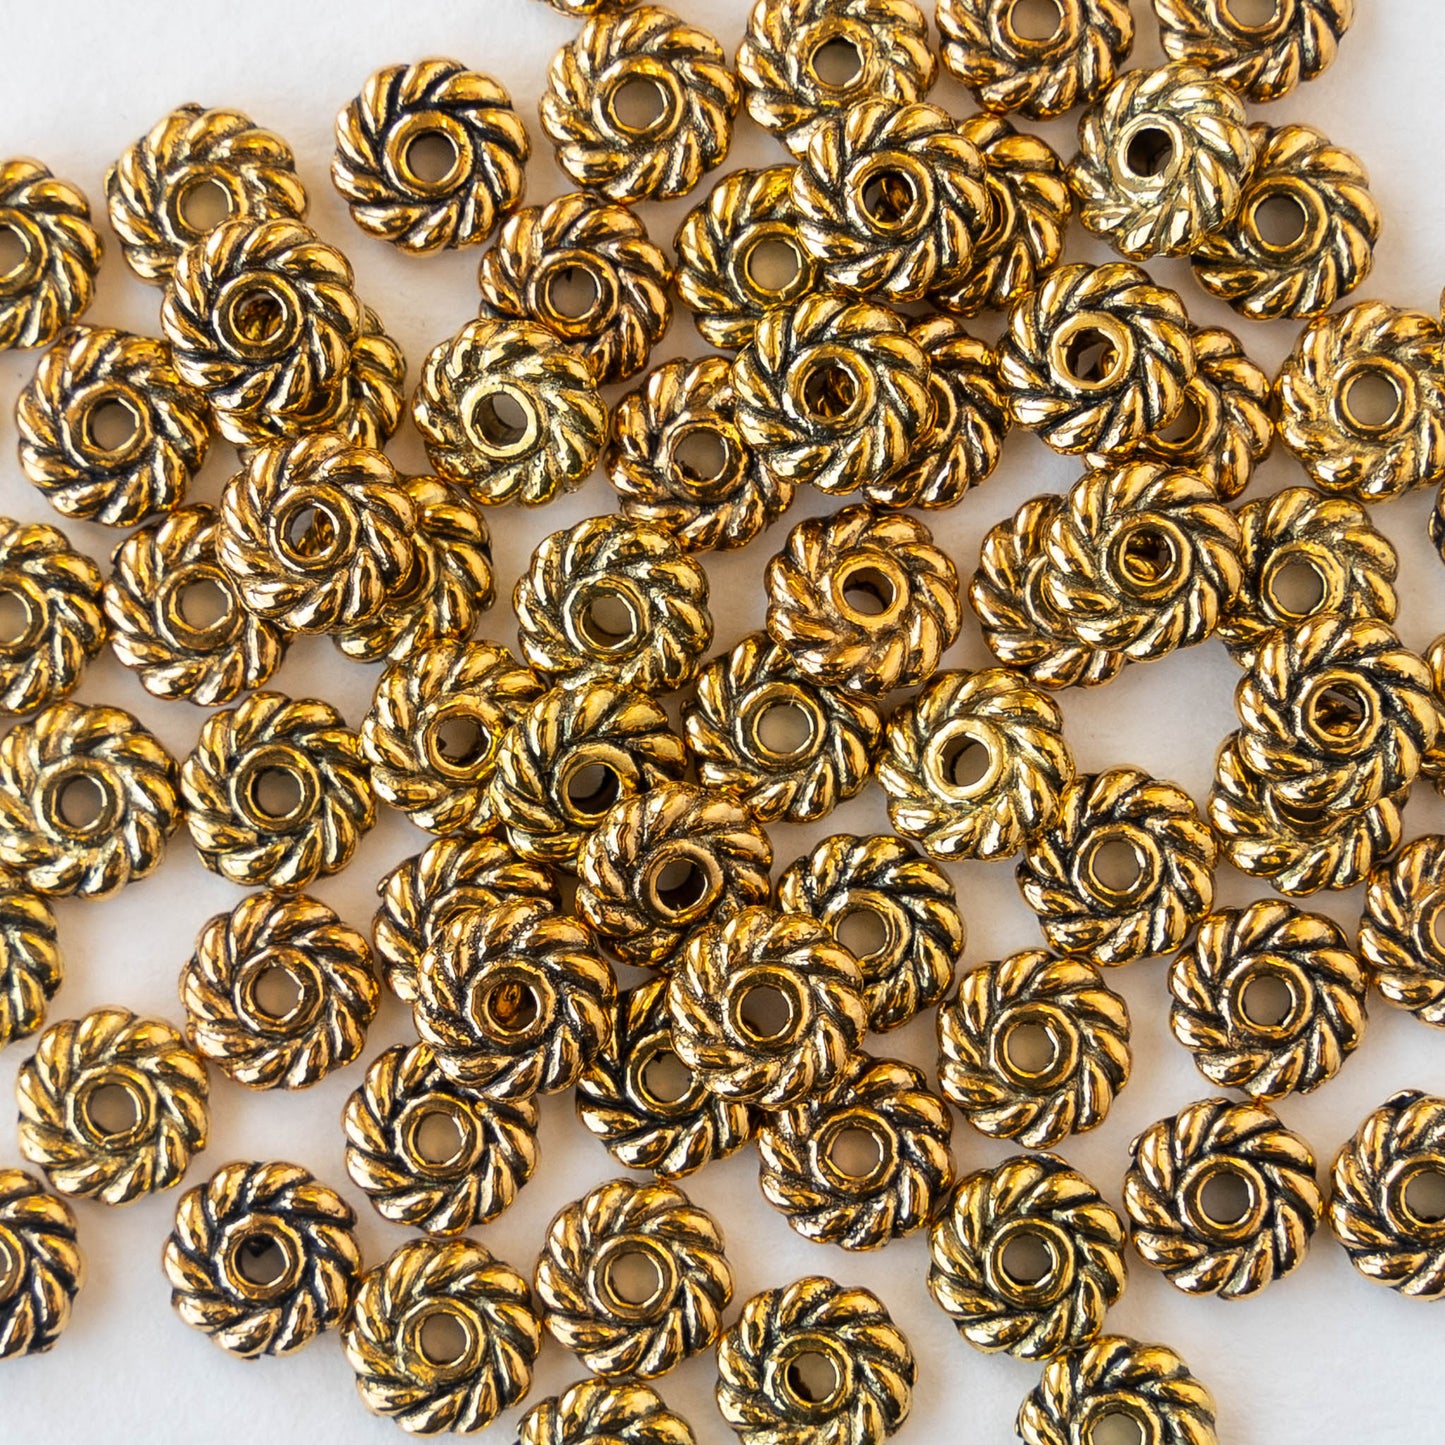 6mm Metal Spacer Beads - 30 Beads